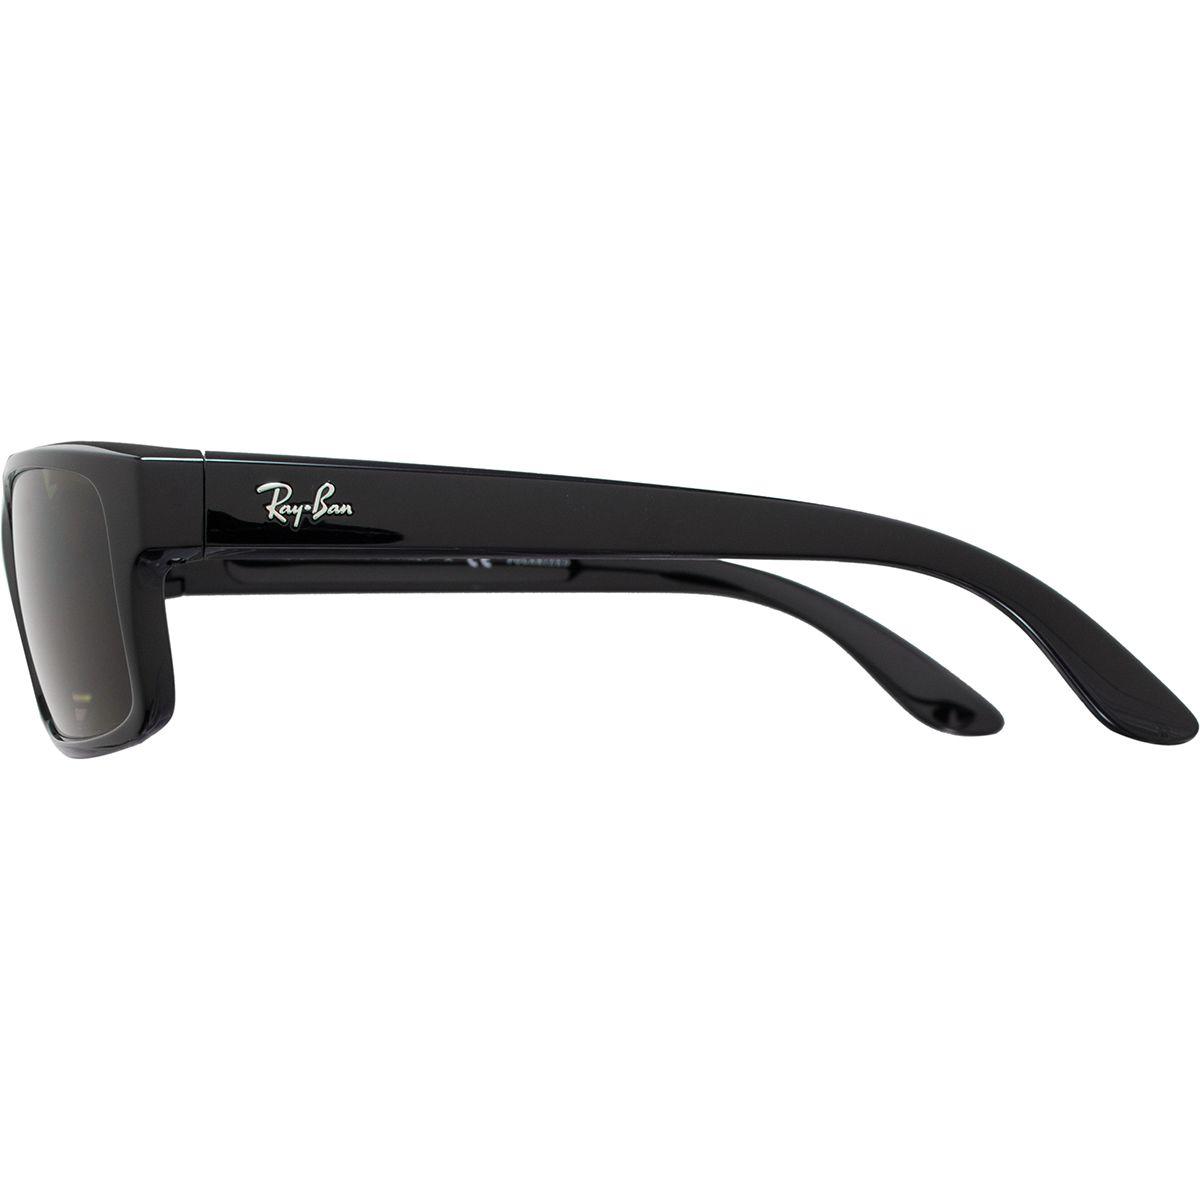 Ray-Ban Synthetic Rb4151 Polarized Sunglasses in Black for Men - Lyst